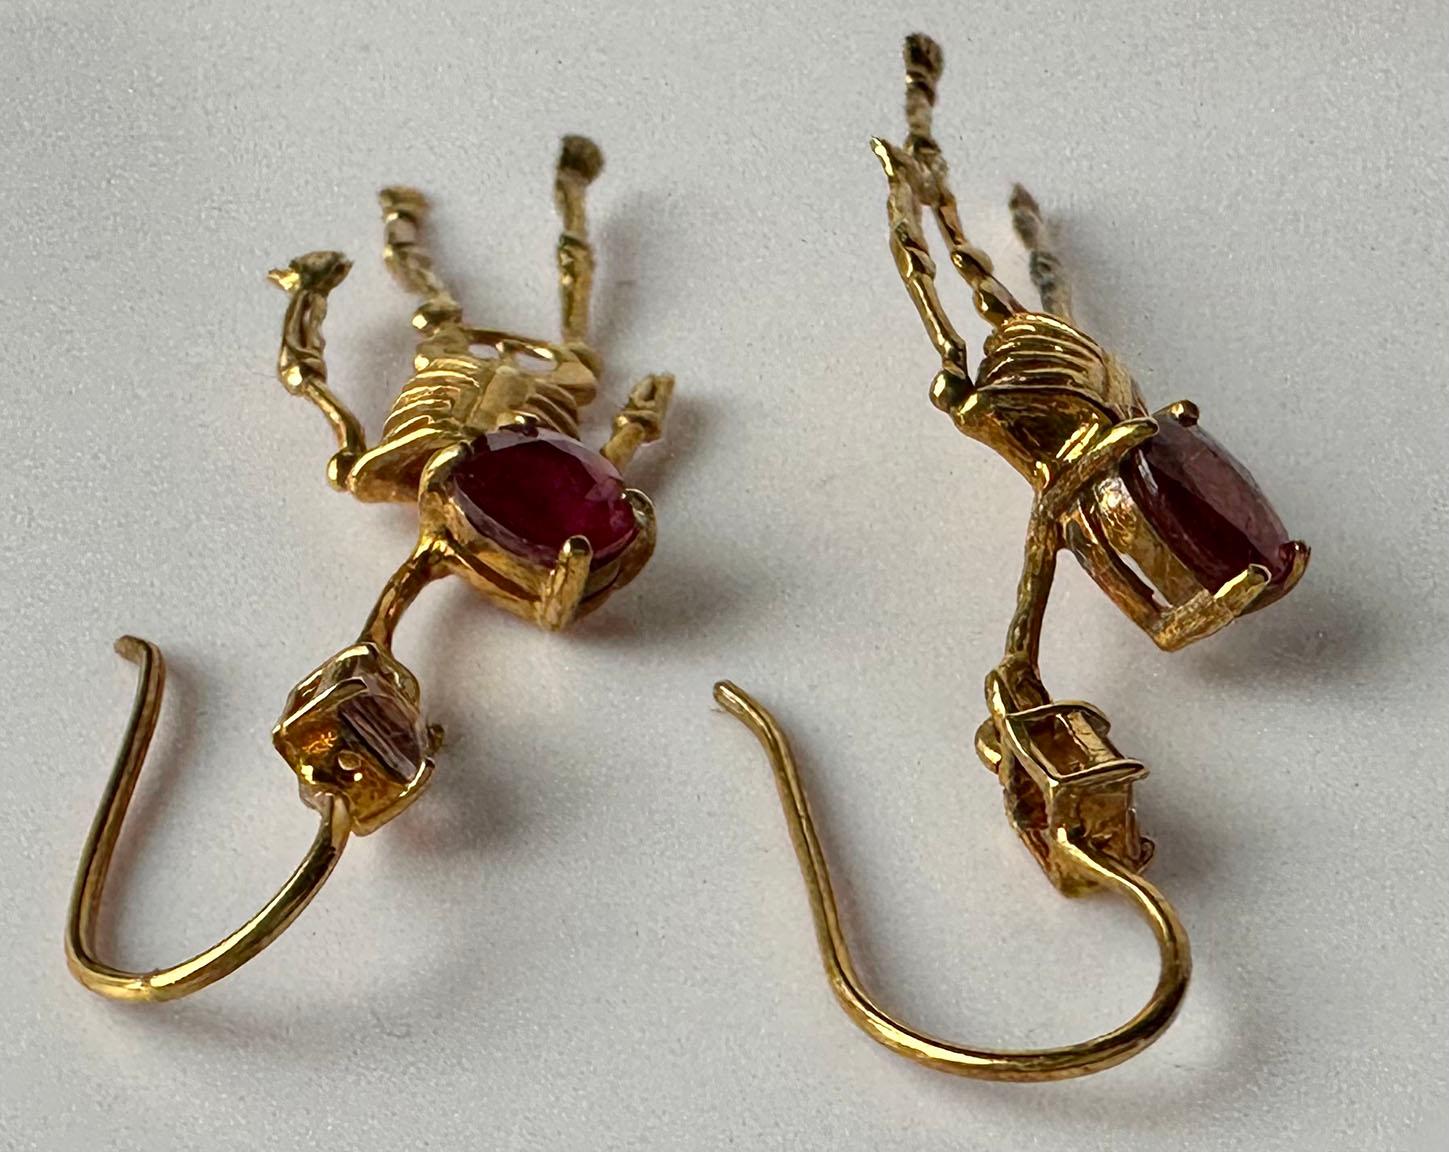 Silver Skeleton Earrings set with Ruby and Tourmaline For Sale 11